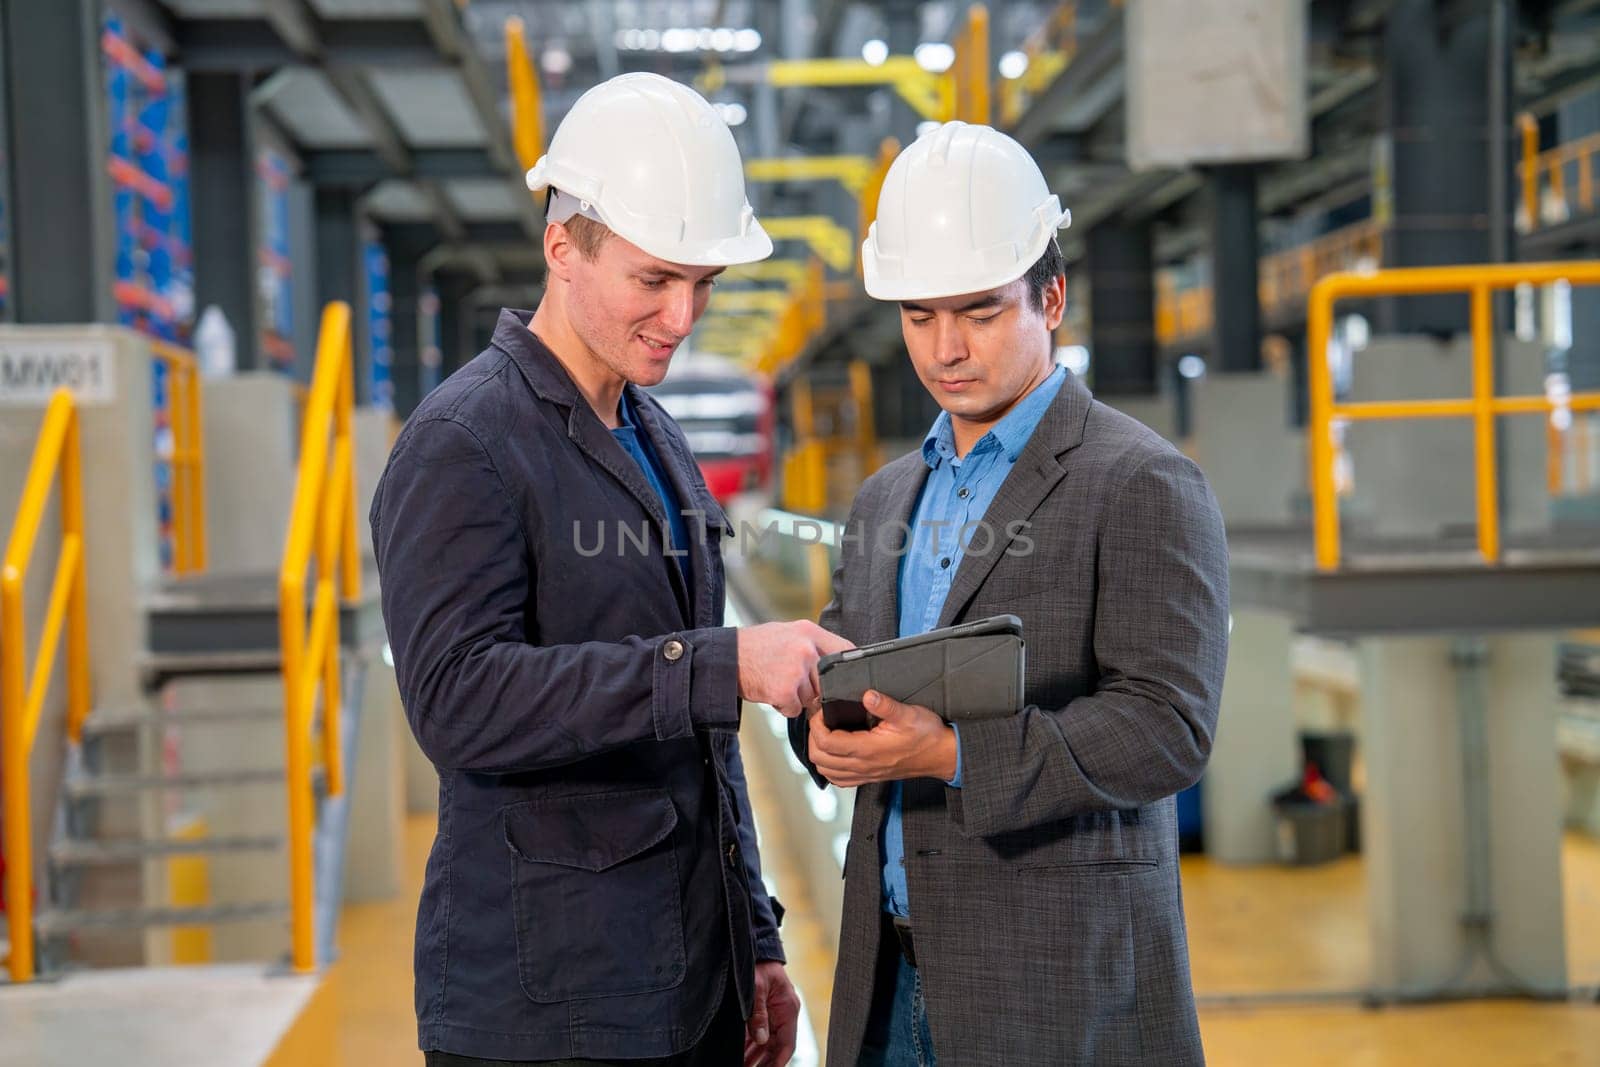 Professional manager or engineer workers discuss together with tablet in front of electrical or metro train in the factory.